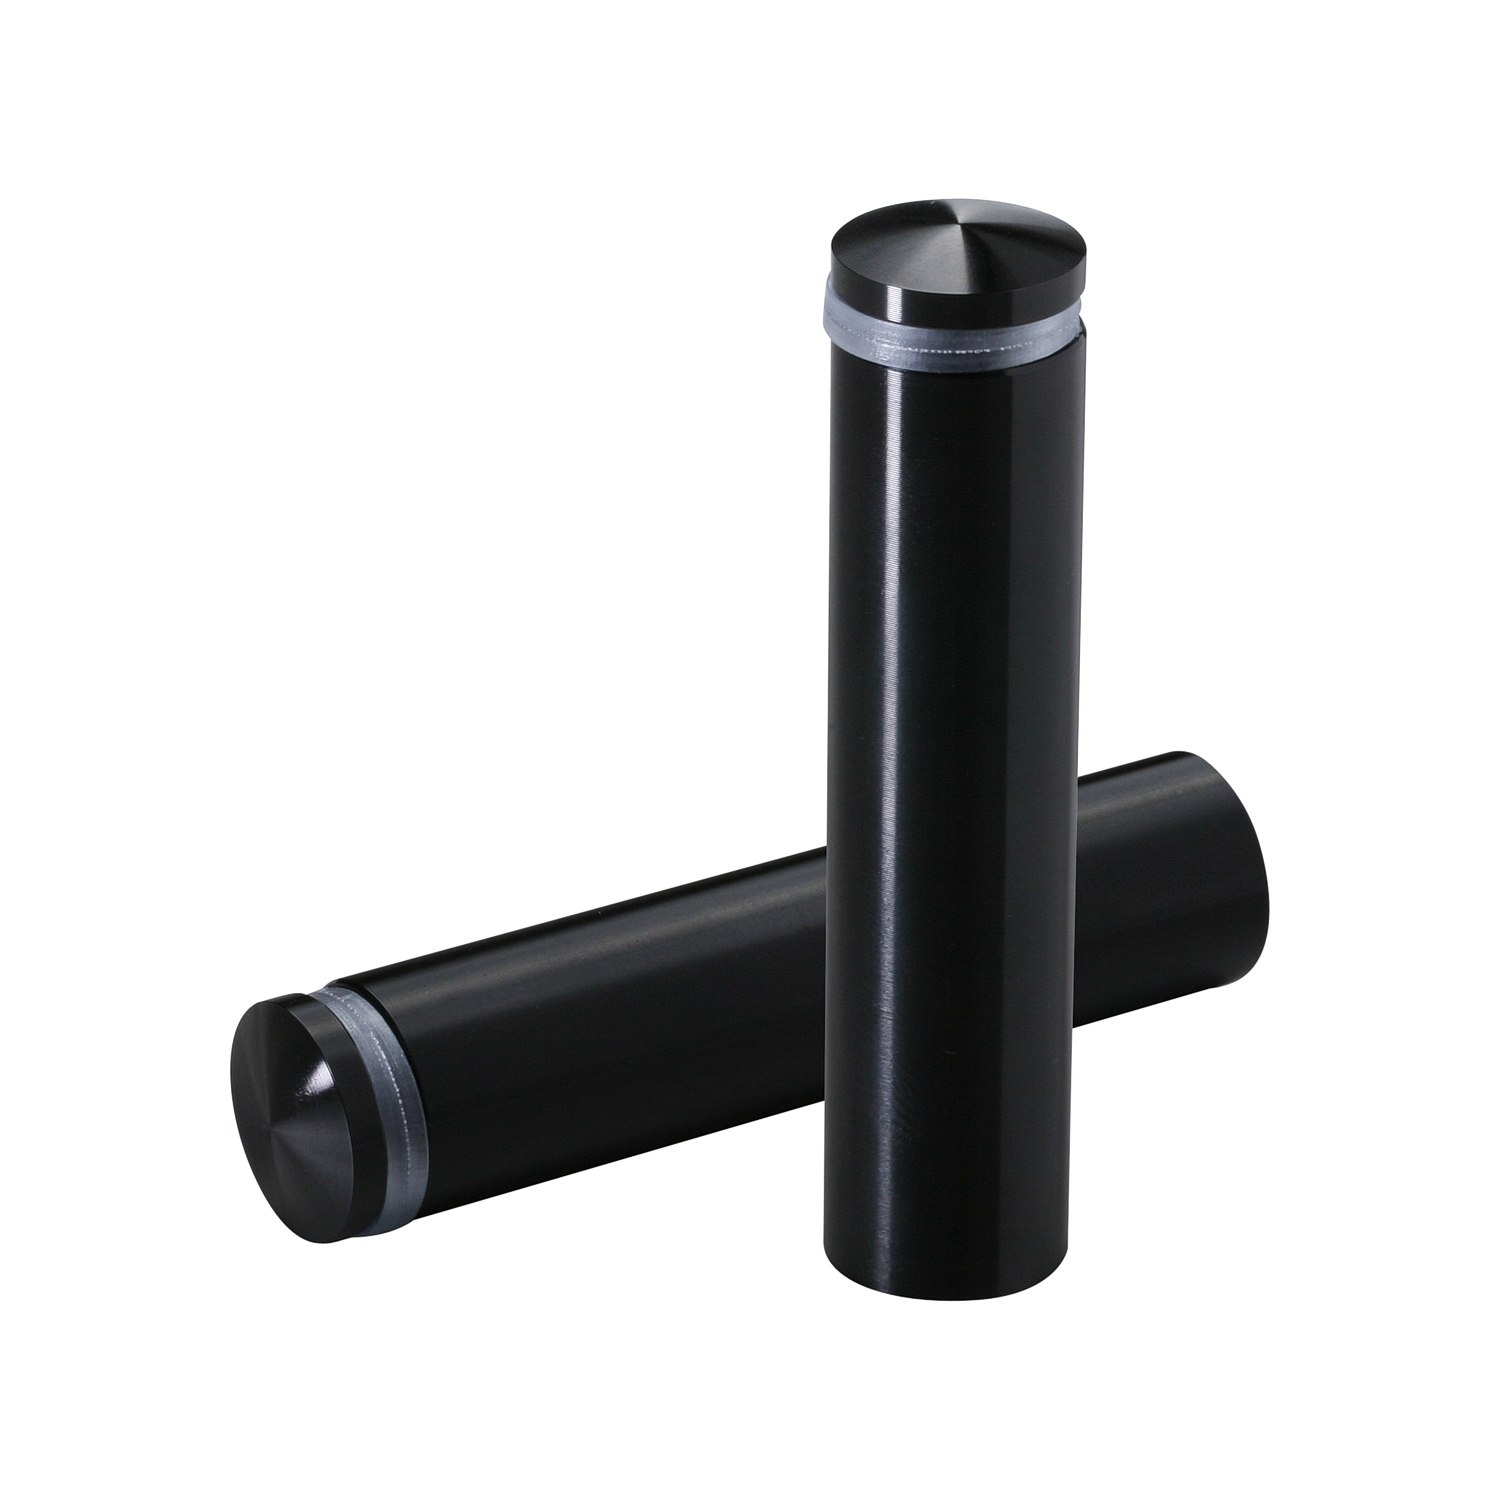 5/8'' Diameter X 2-1/2'' Barrel Length, Aluminum Rounded Head Standoffs, Black Anodized Finish Easy Fasten Standoff (For Inside / Outside use) [Required Material Hole Size: 7/16'']